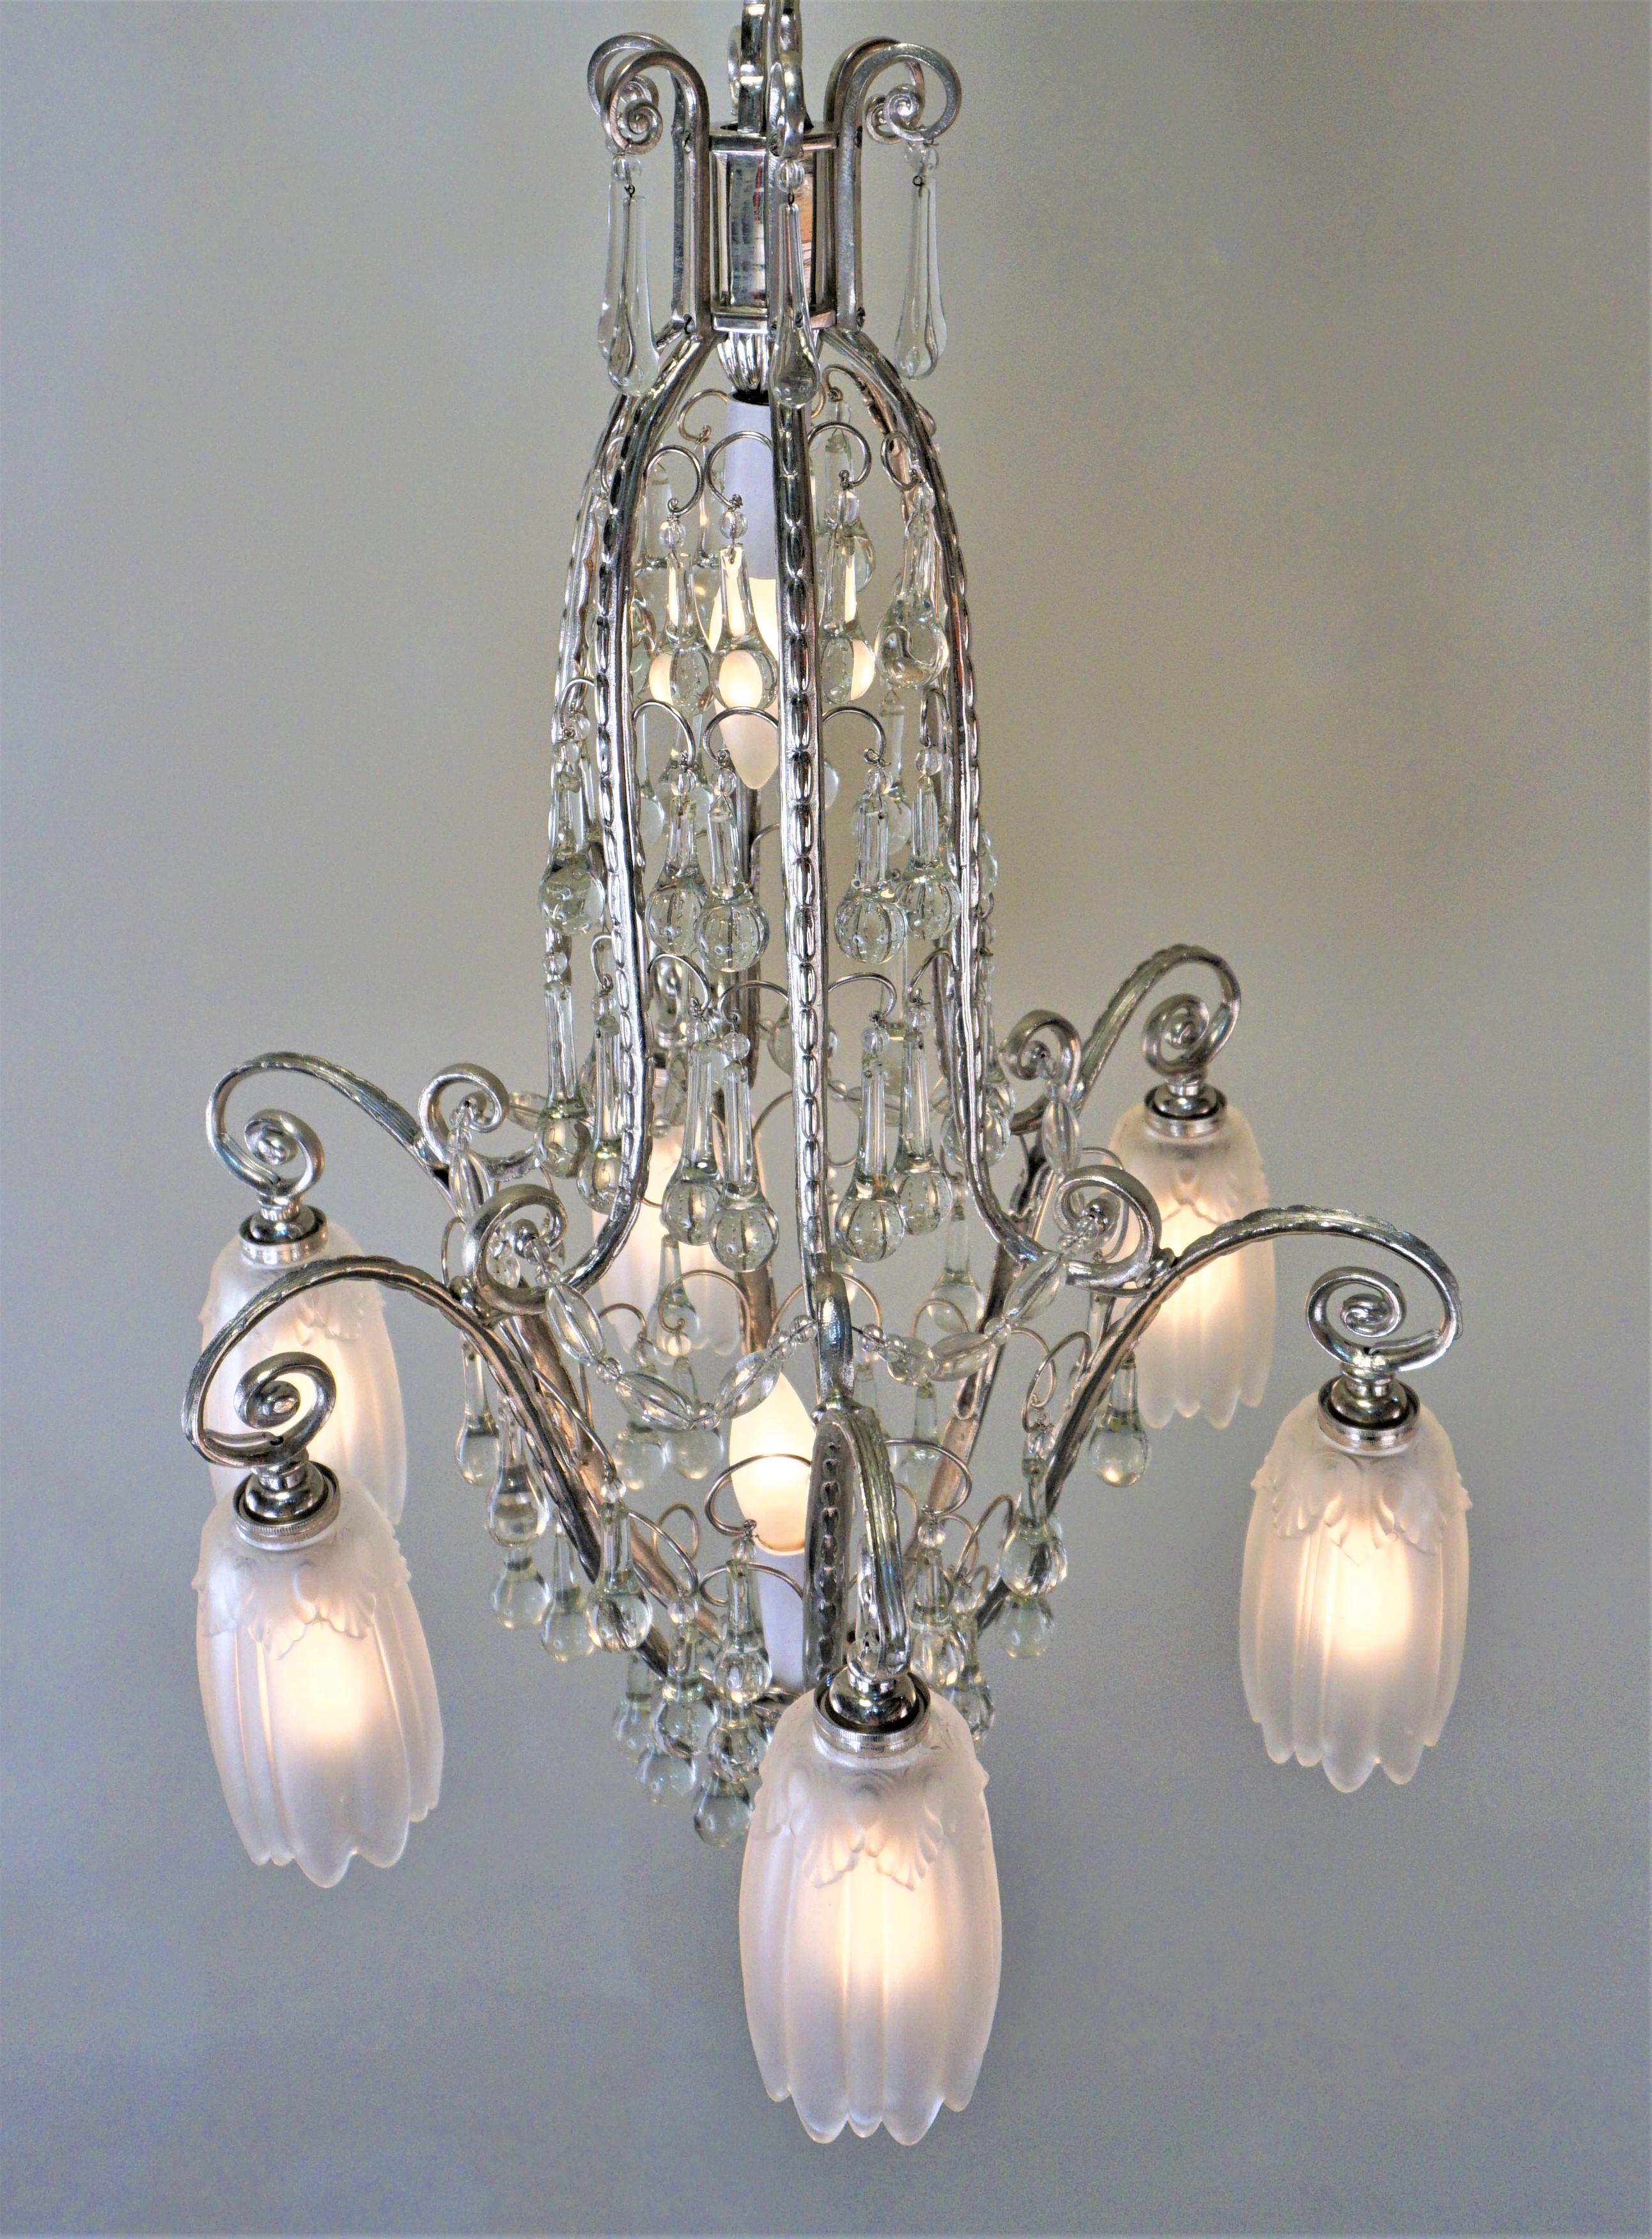 Mid-20th Century French 1930s Art Deco Crystal and Nickel Chandelier